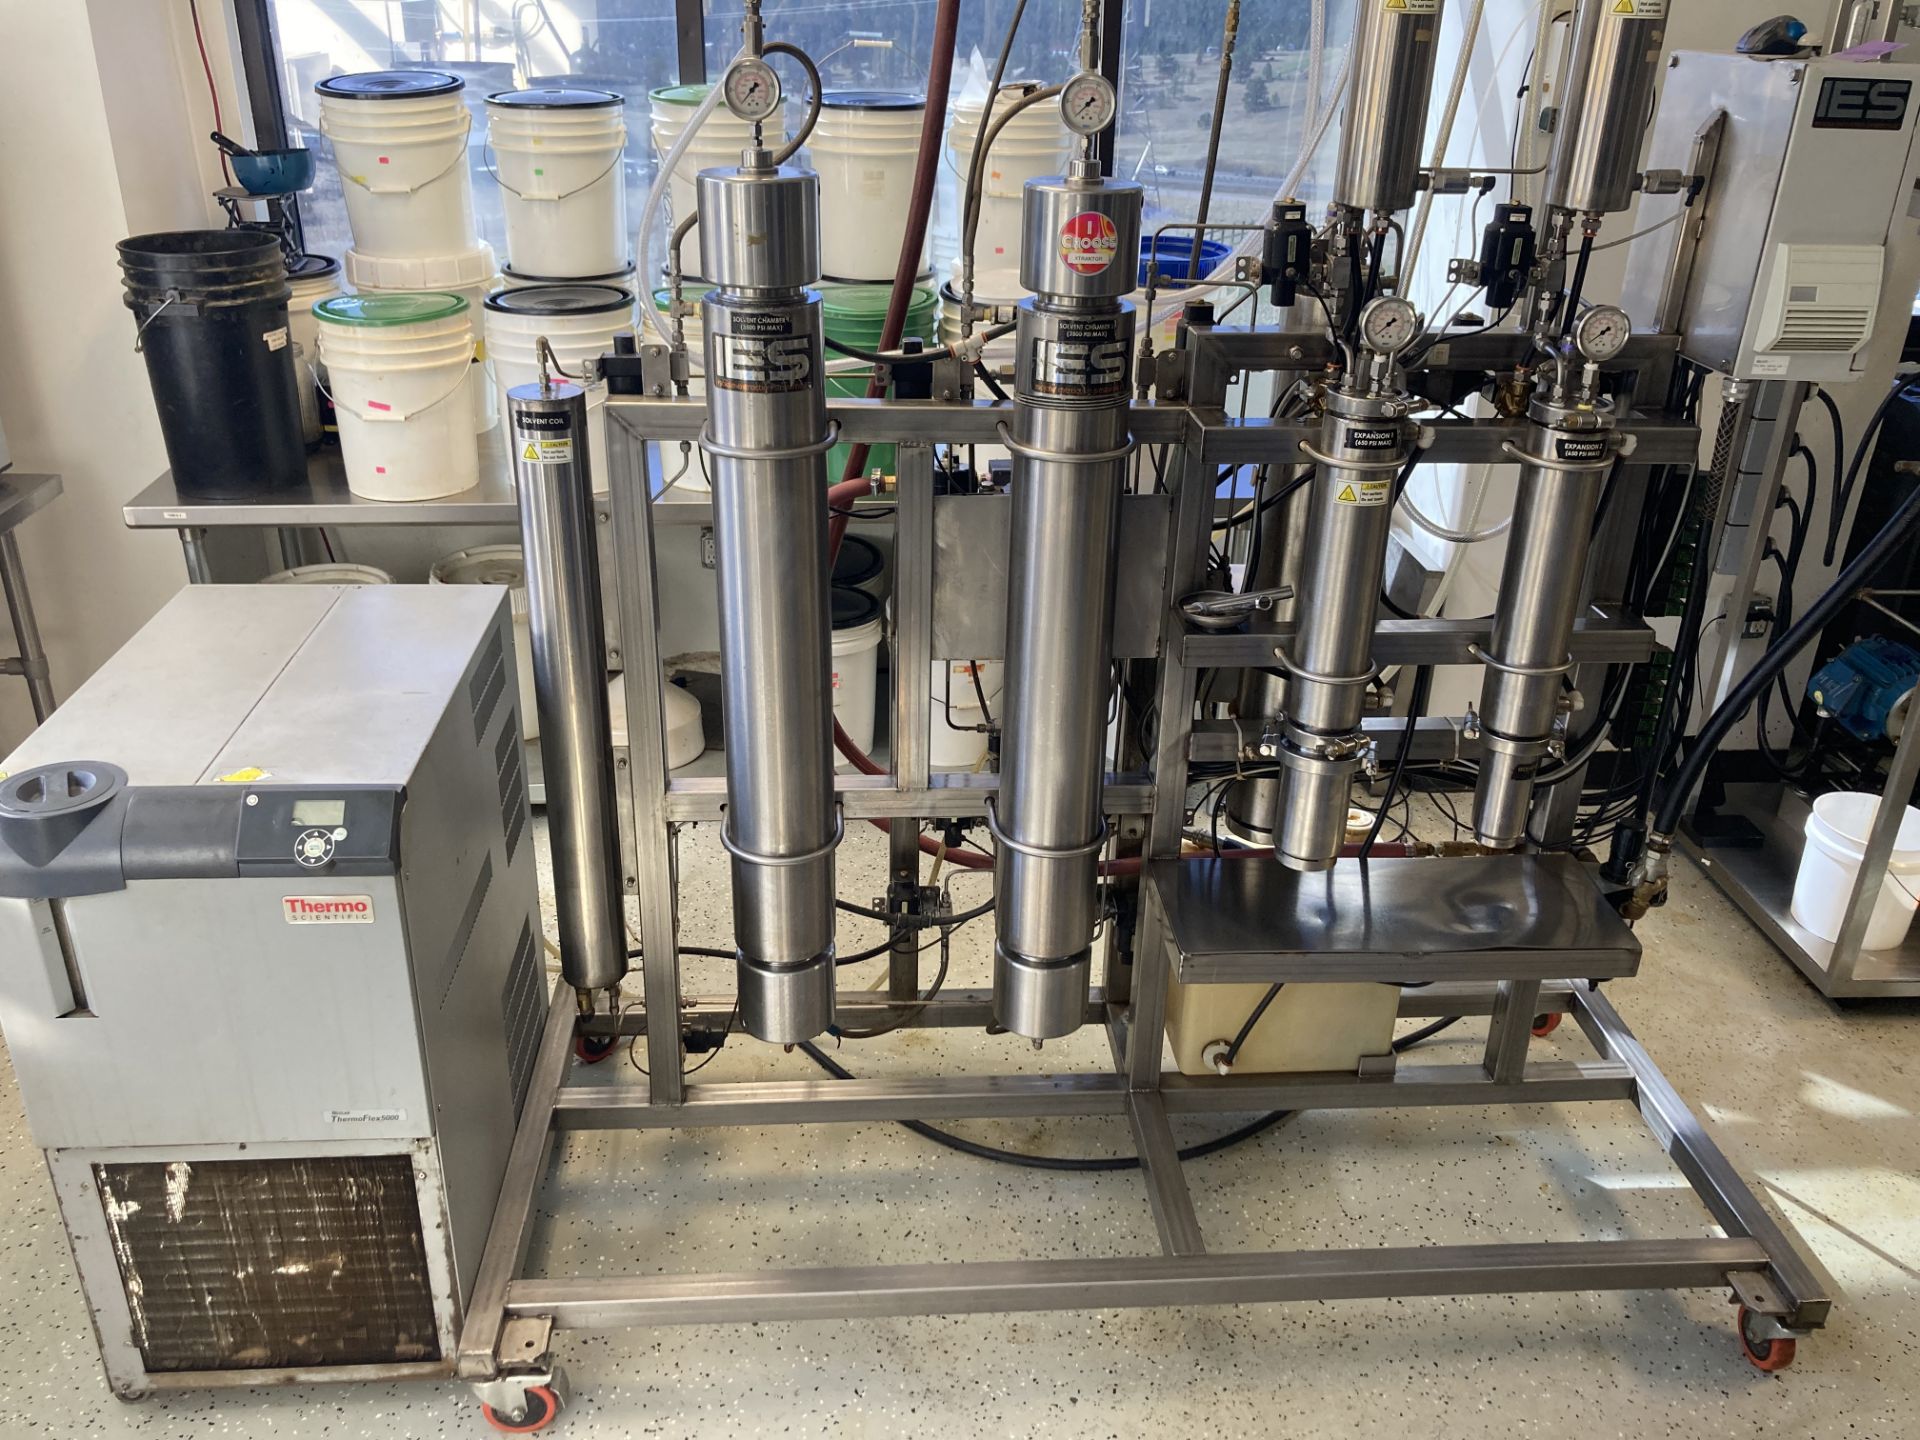 (Located in Evergreen, CO) Supercritical Pneumatic 10L CO2 Extractor w/ Chiller